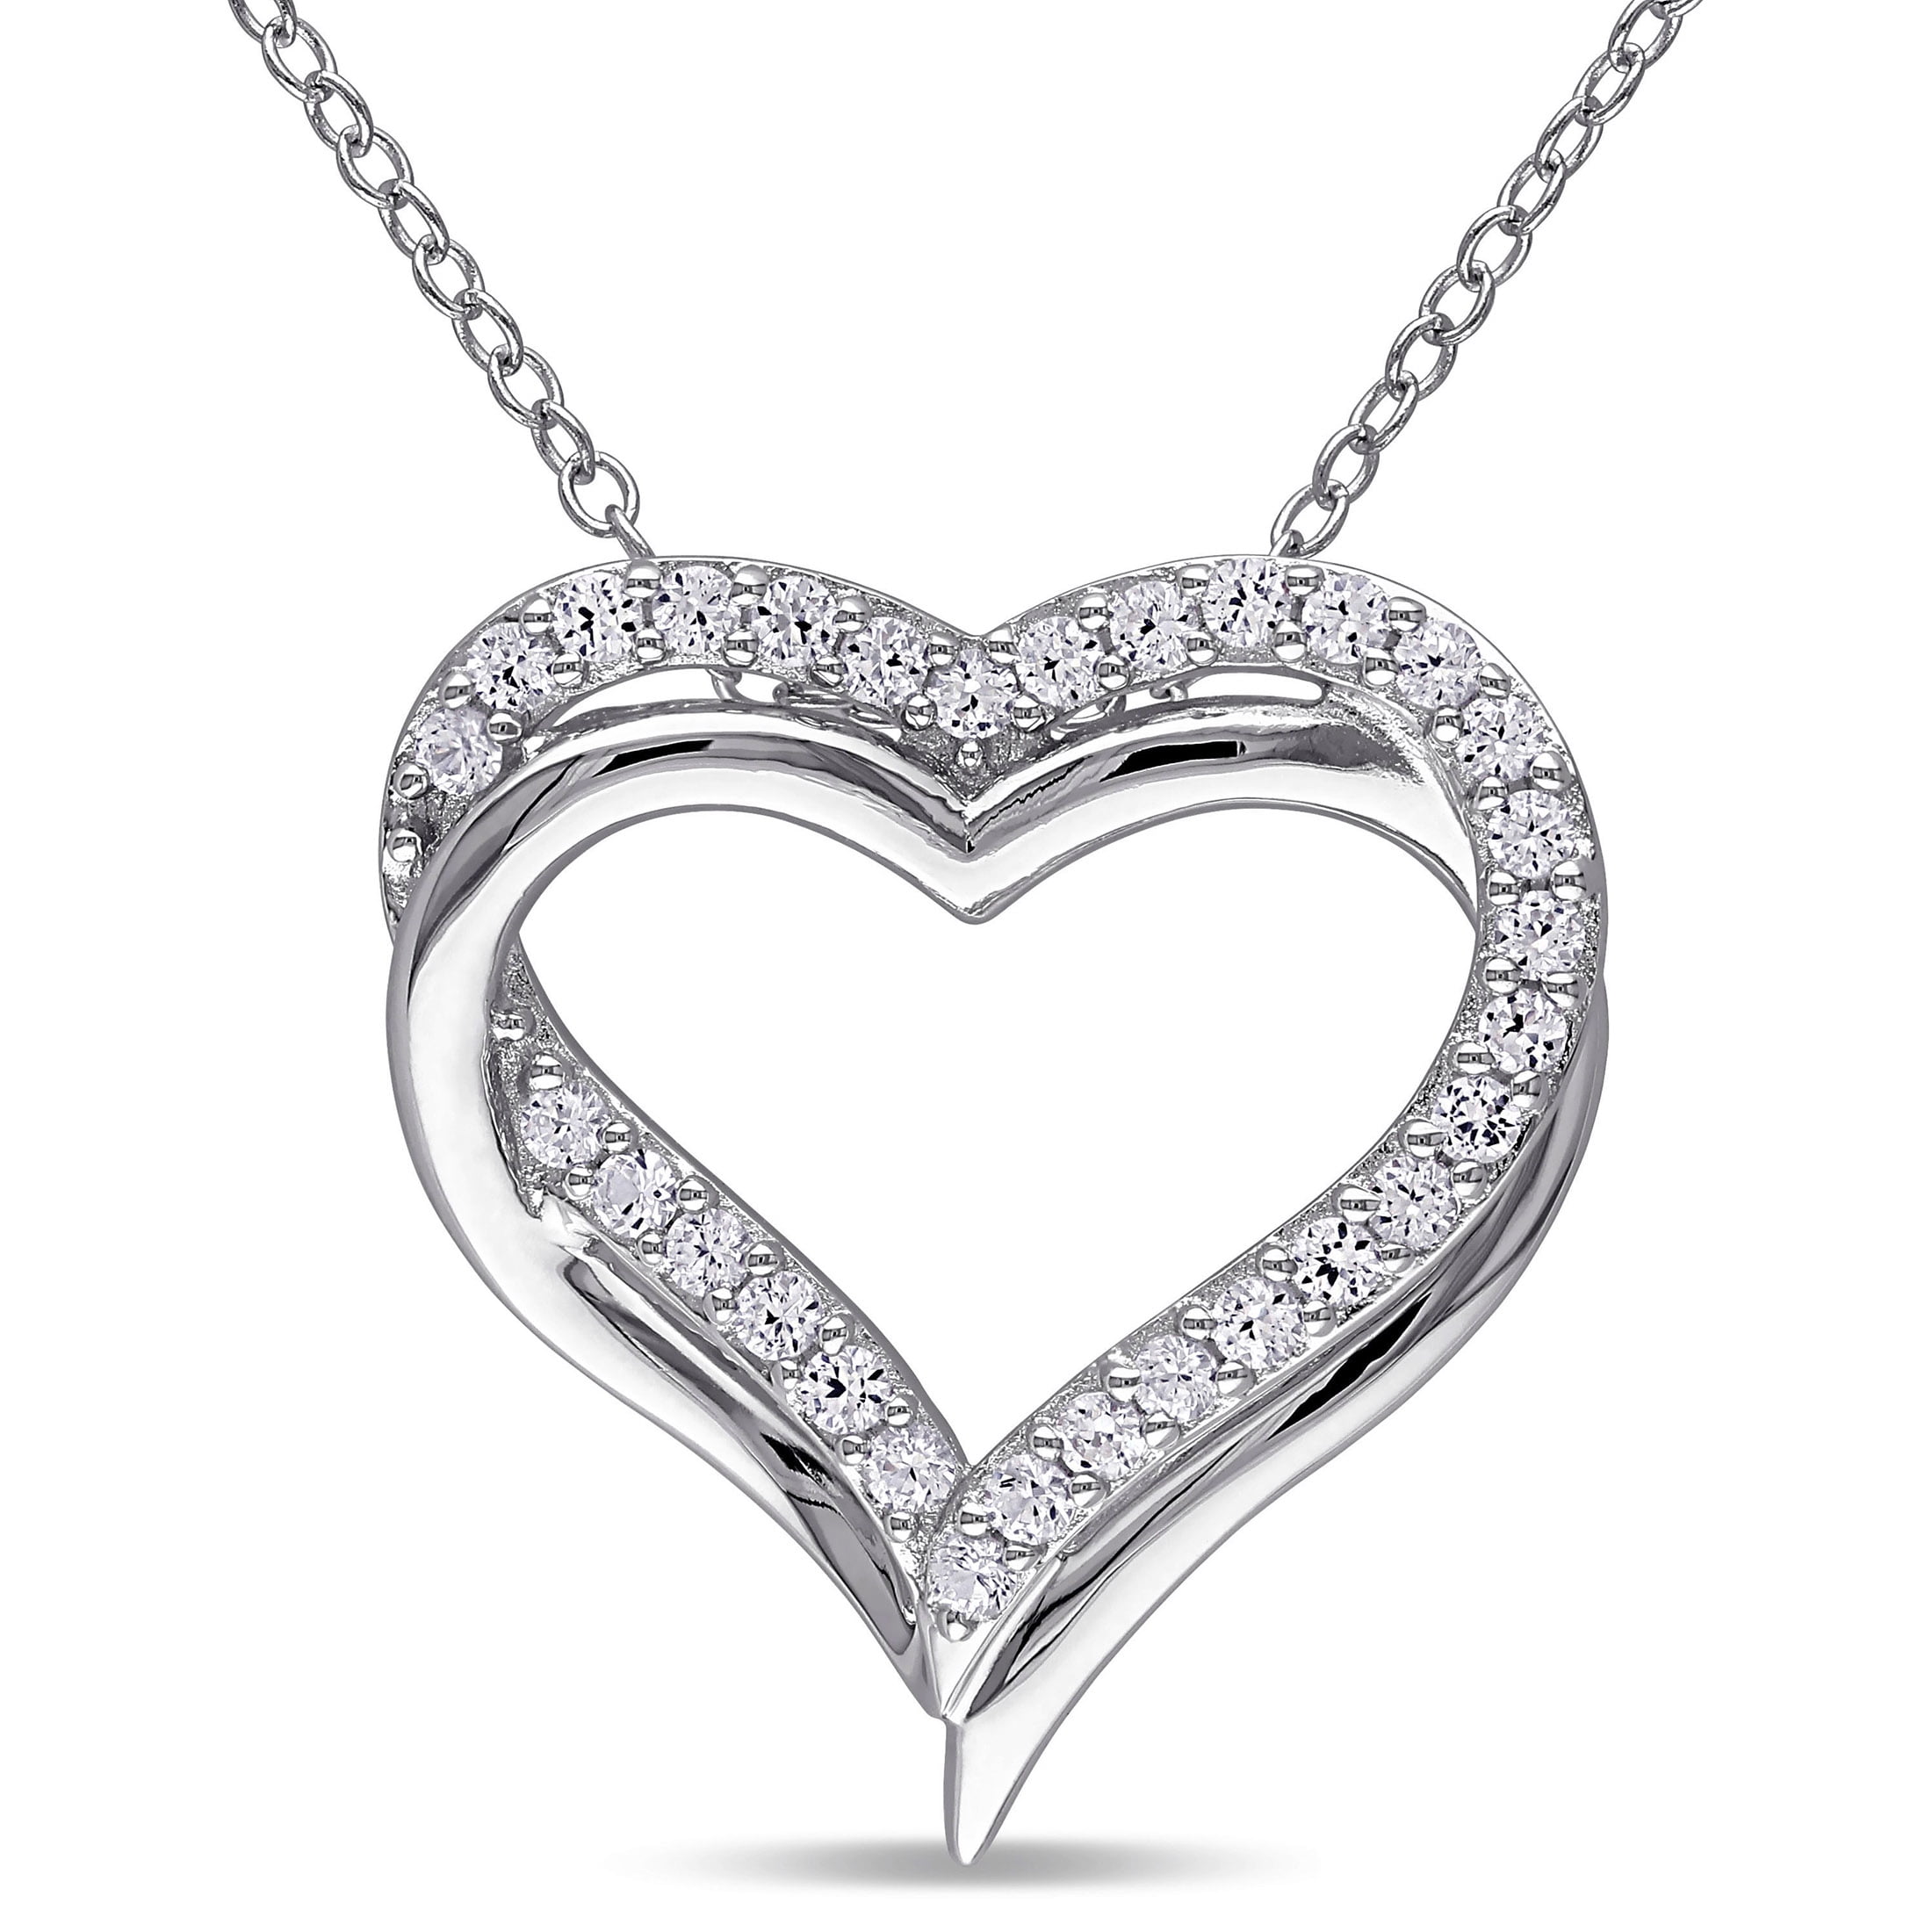 Solid silver cut out heart pendant ‘two hearts make one’